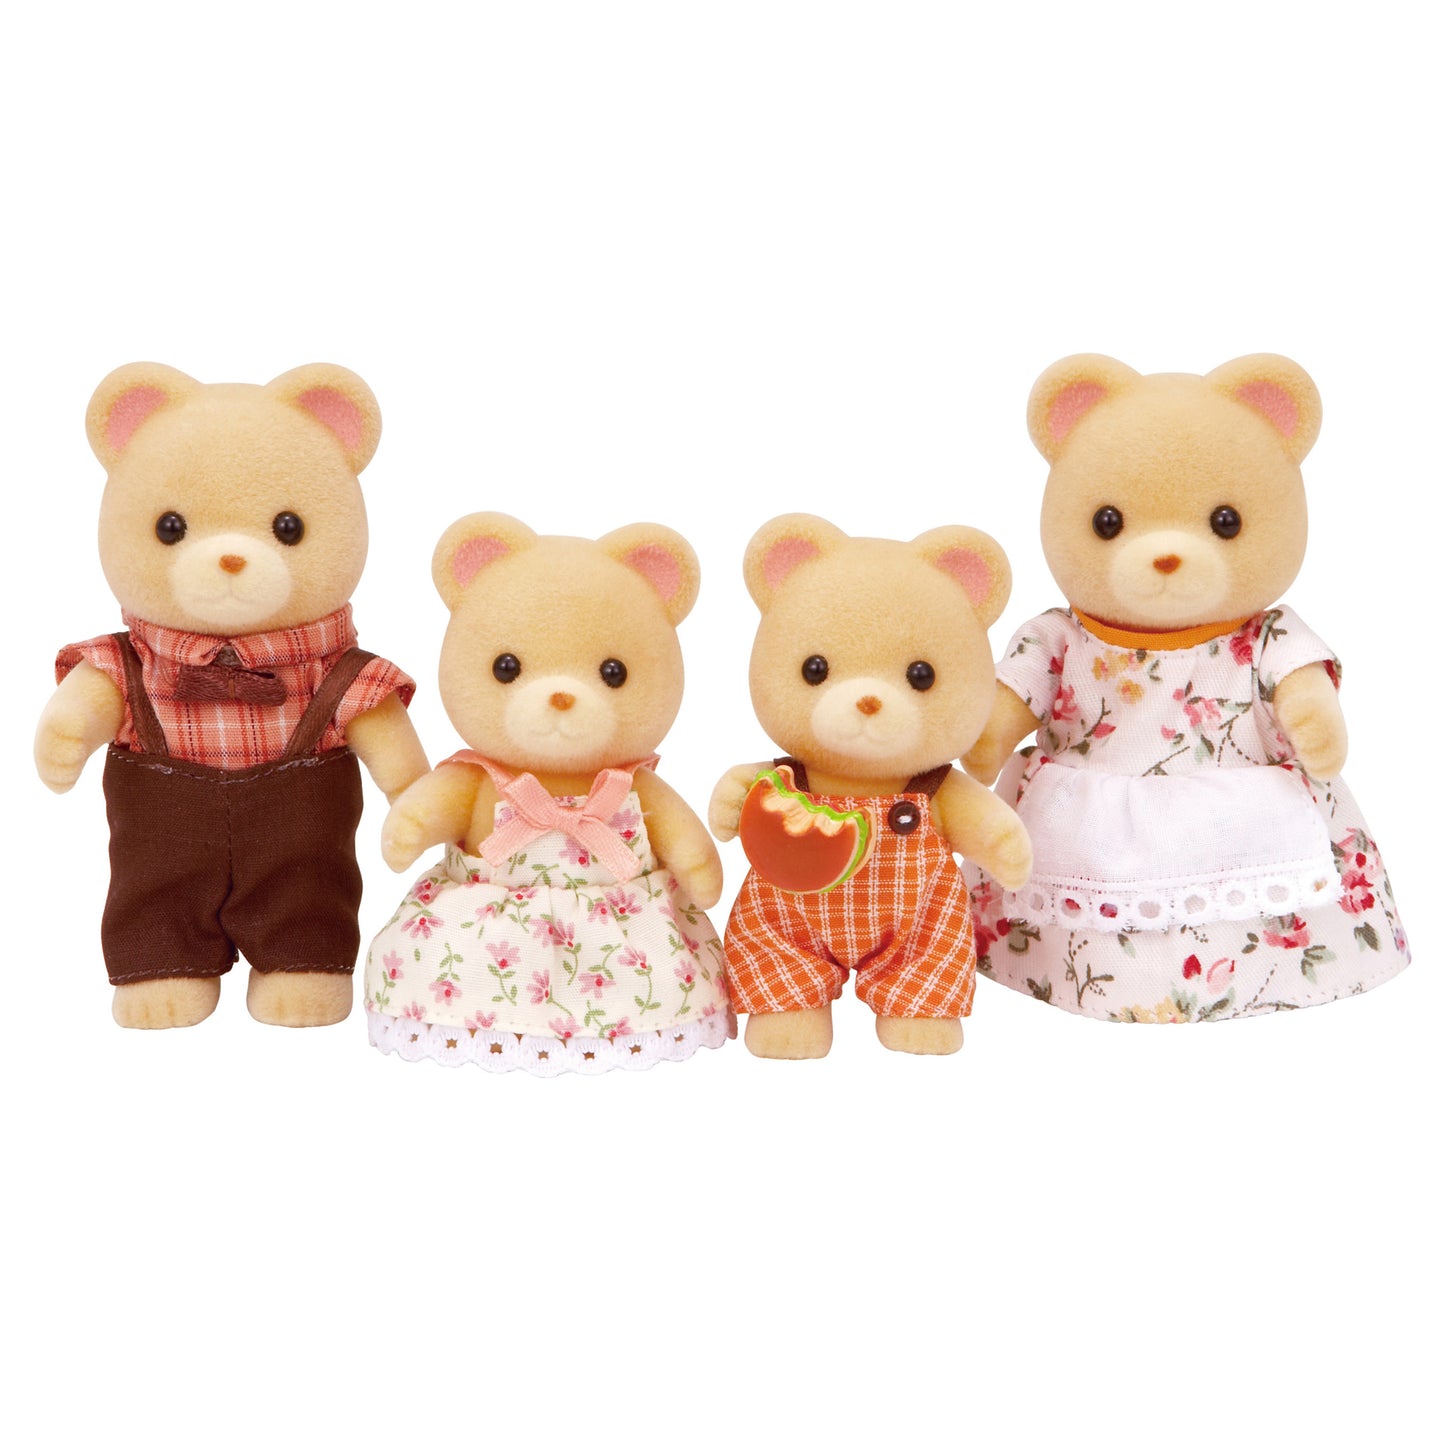 Calico Critters - Cuddle Bear Family